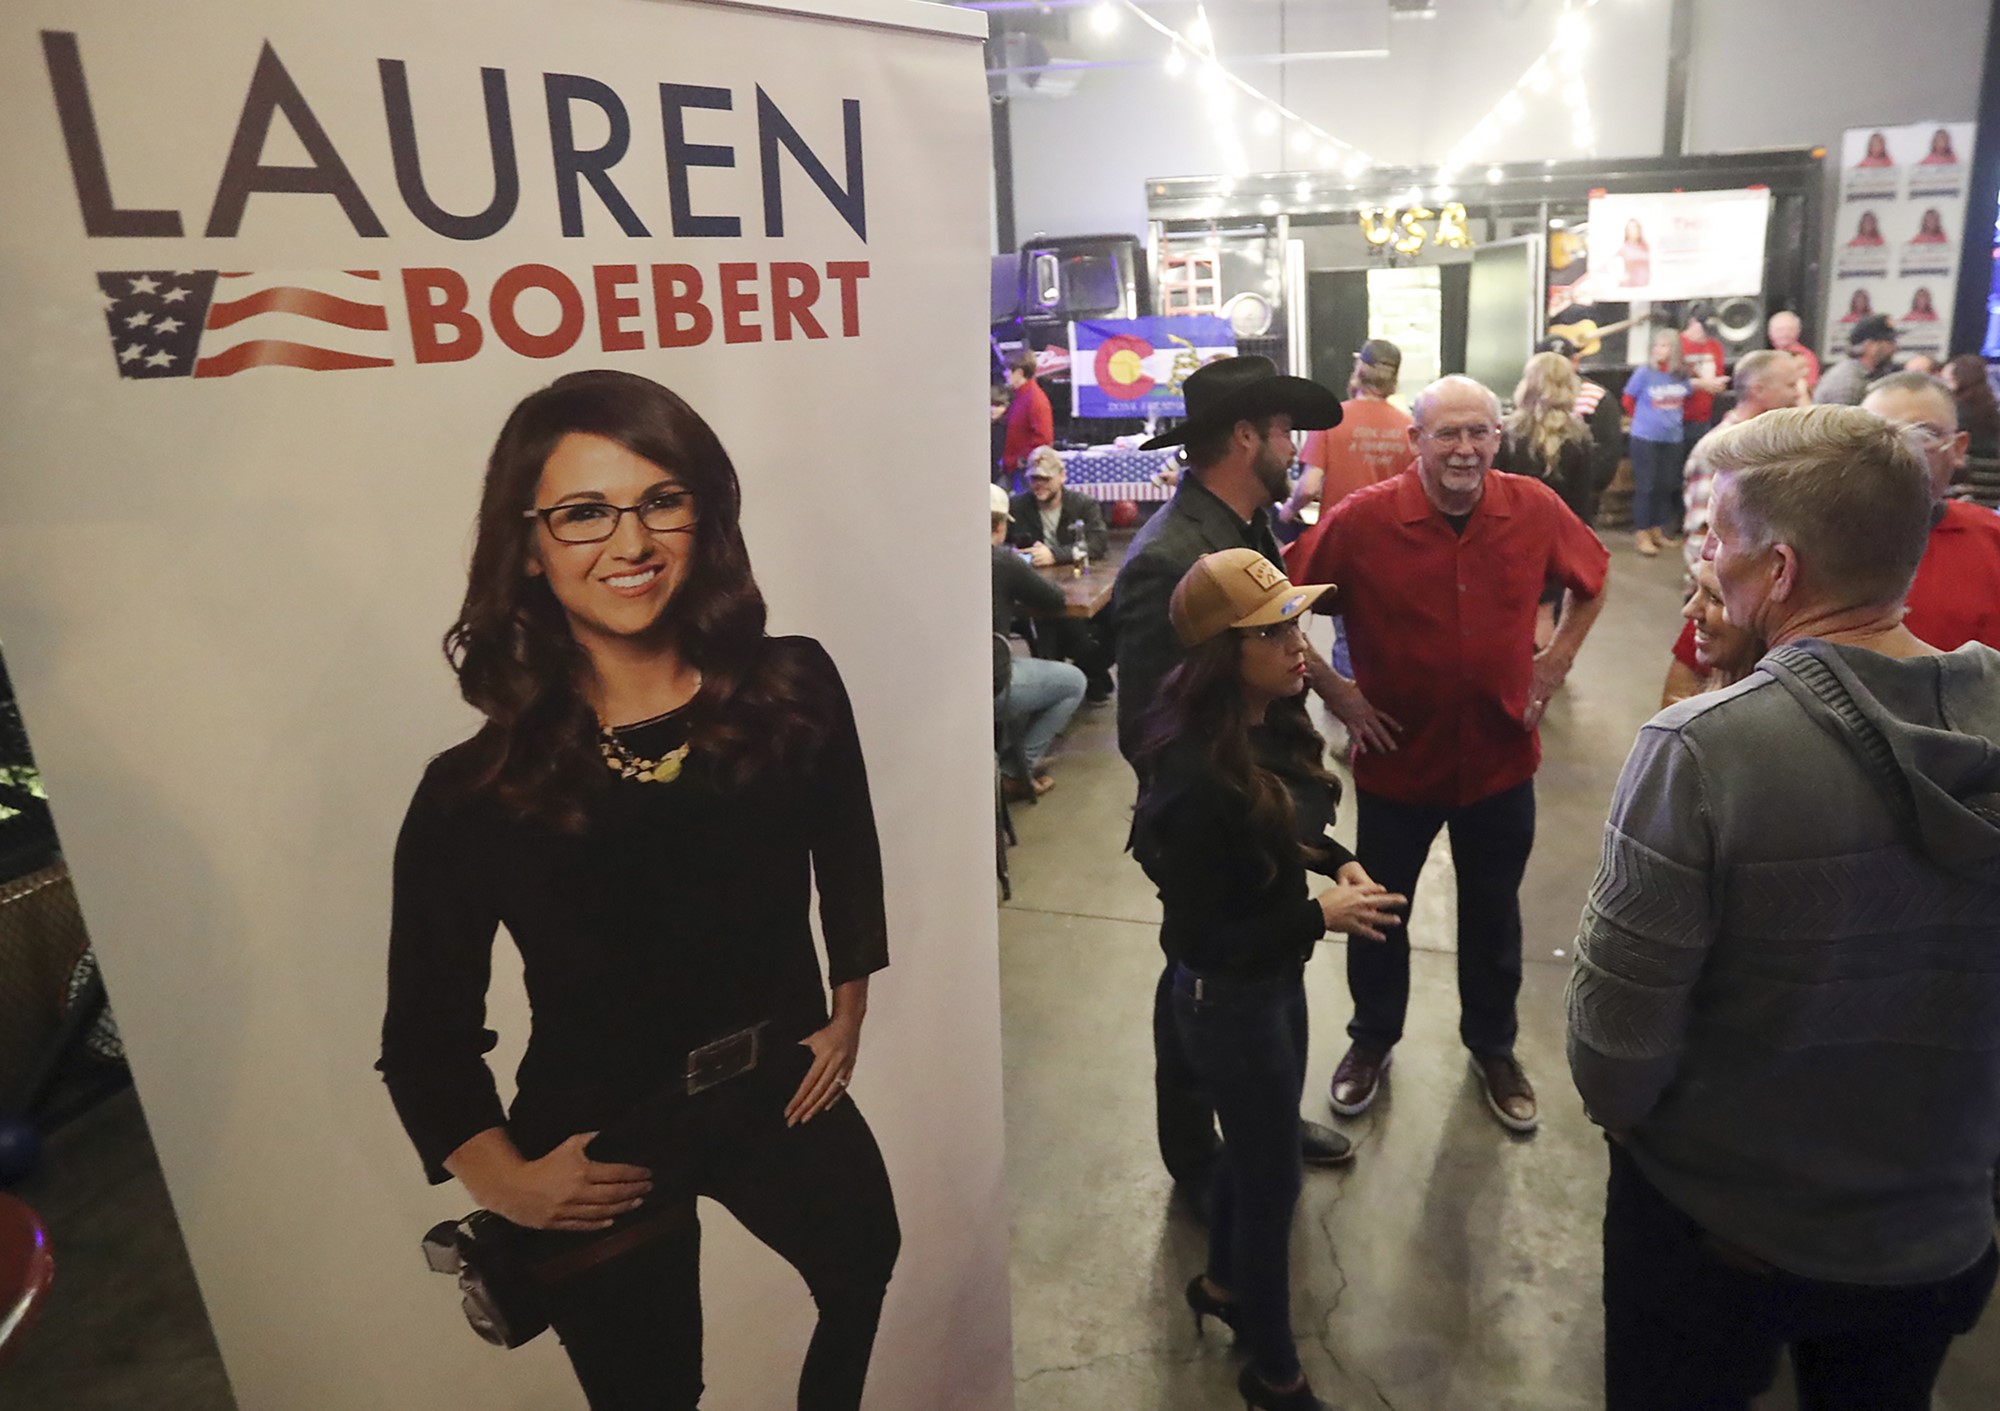 Supporters mill around a Lauren Boebert sign during midterm election night.